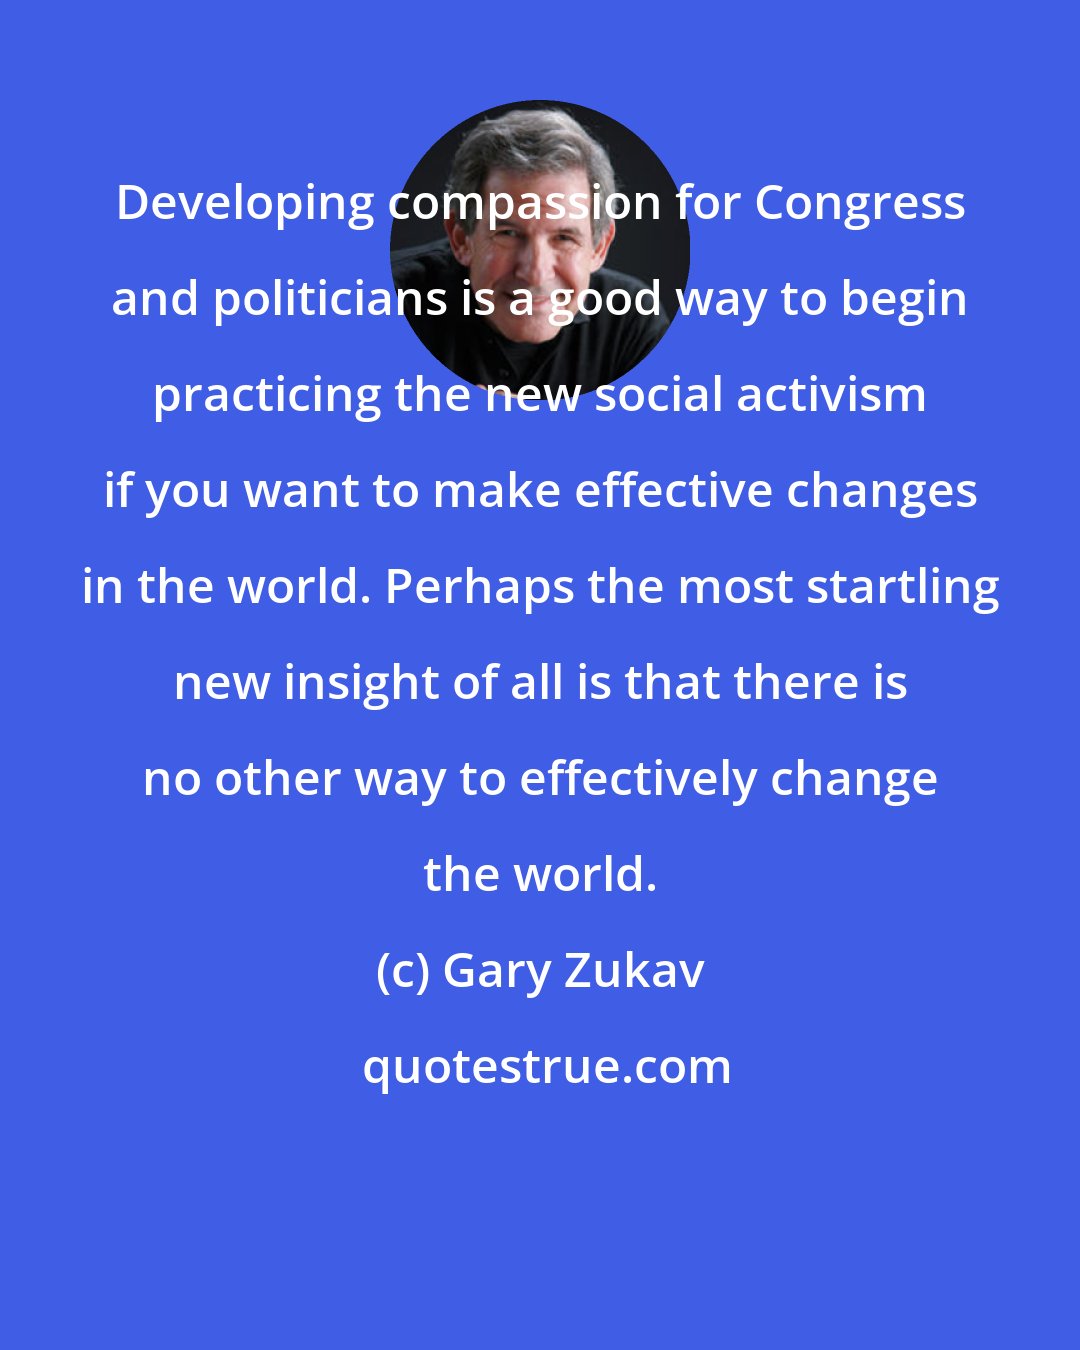 Gary Zukav: Developing compassion for Congress and politicians is a good way to begin practicing the new social activism if you want to make effective changes in the world. Perhaps the most startling new insight of all is that there is no other way to effectively change the world.